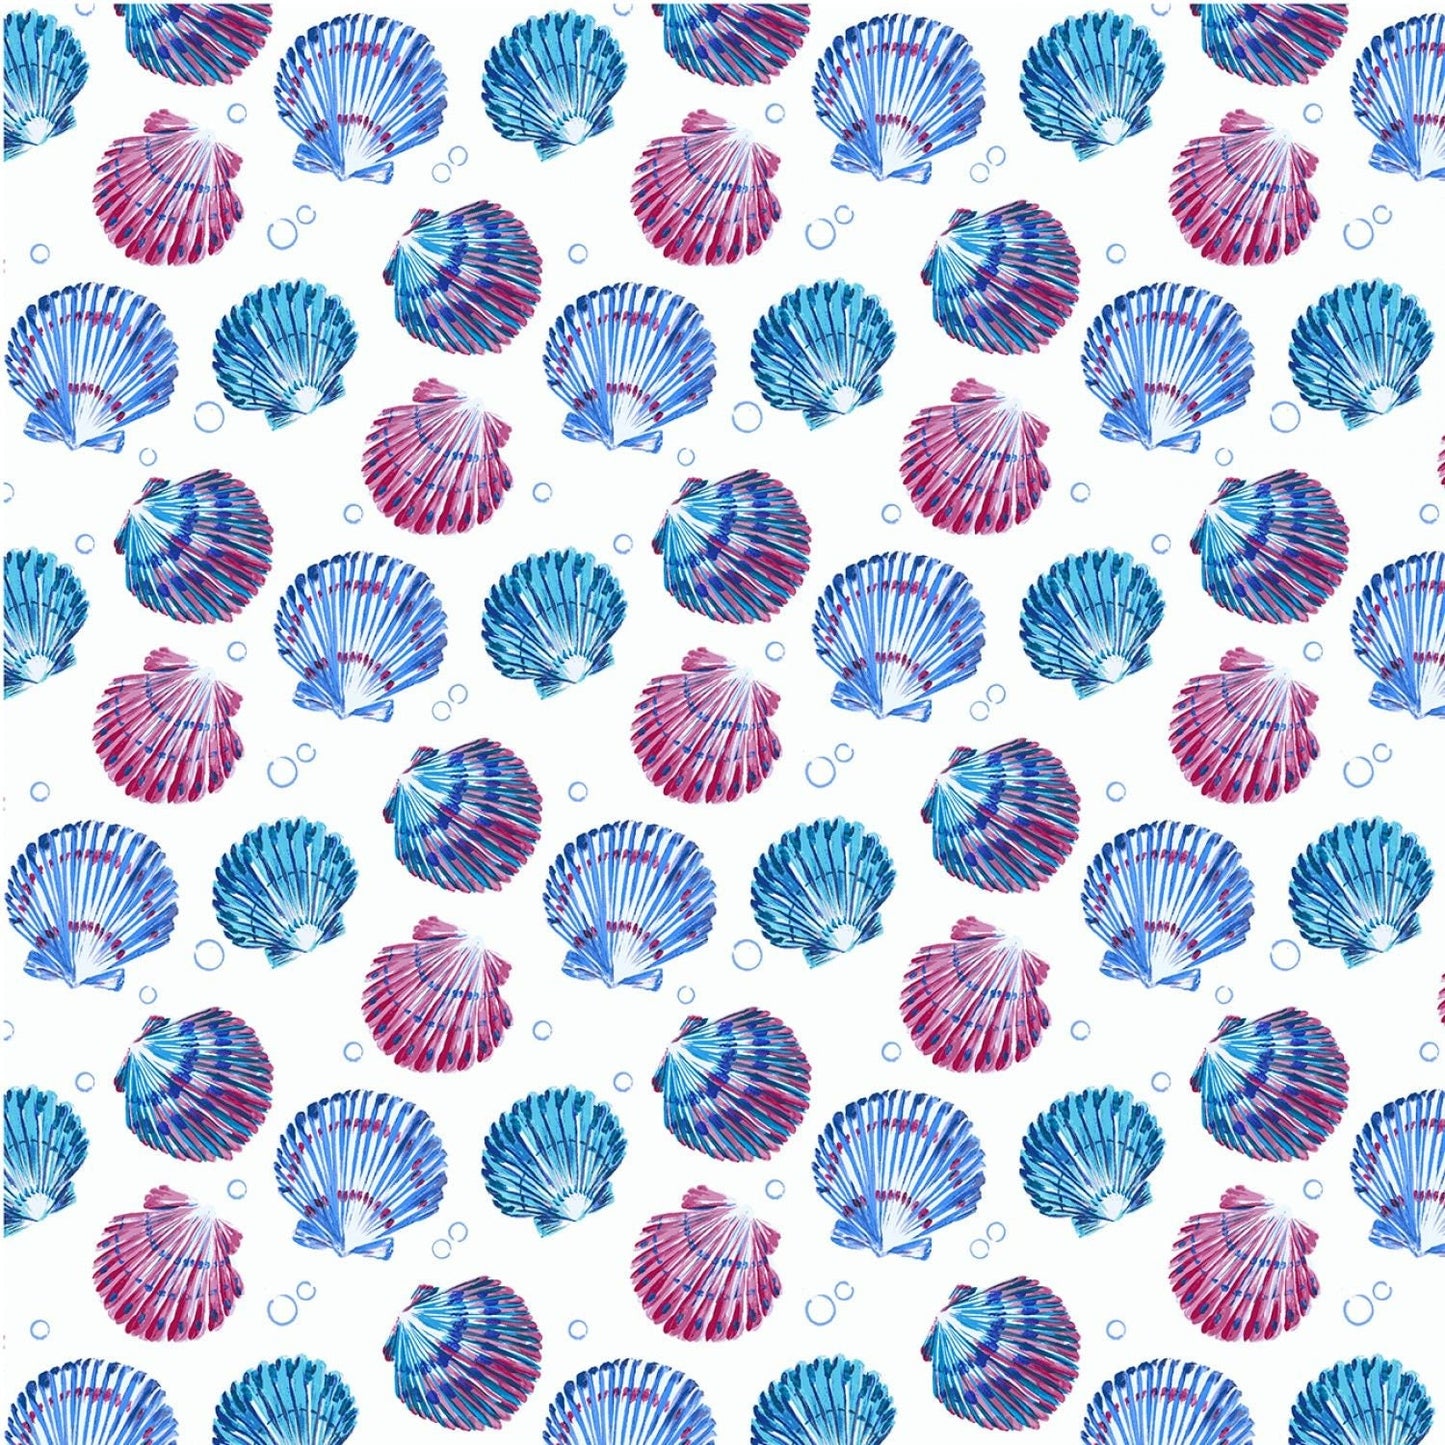 Fanciful Sea Life Ocean Commotion White DCX9955-WHIT Cotton Woven Fabric